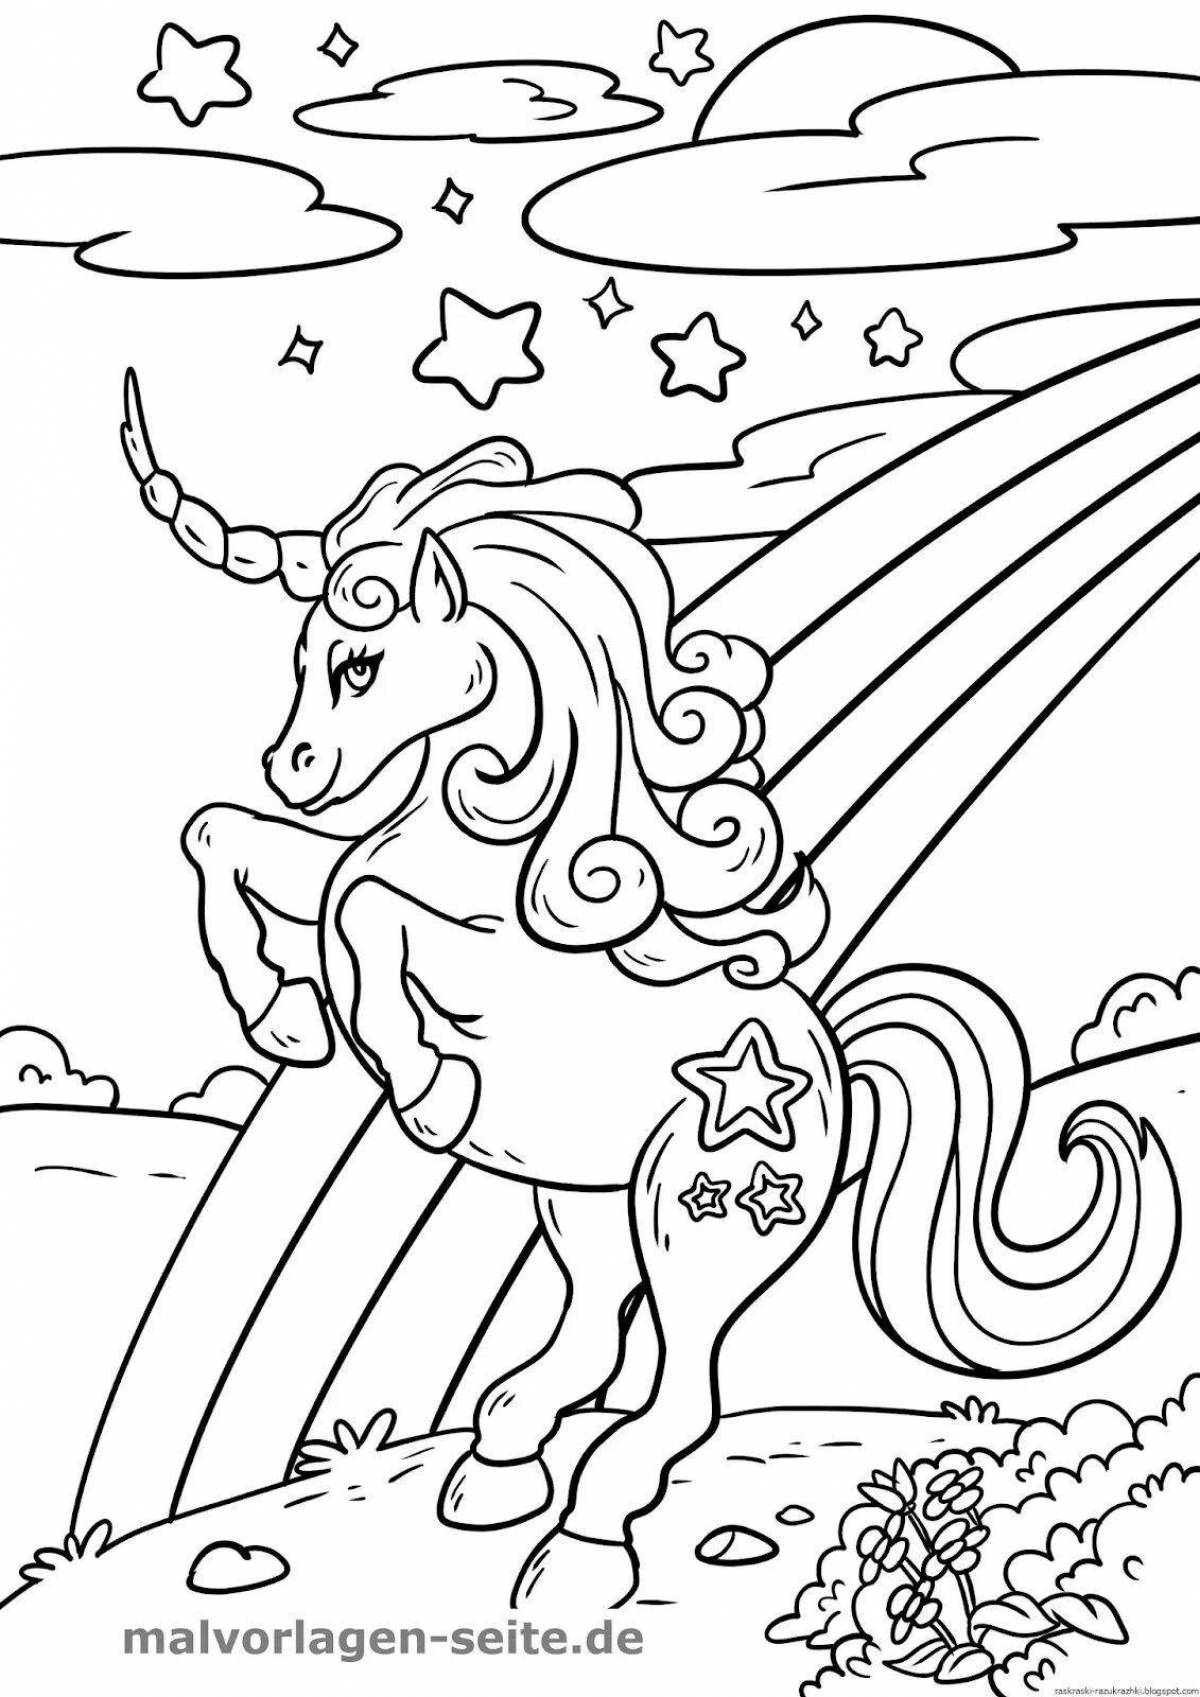 Serene coloring book for girls 7 years old unicorn